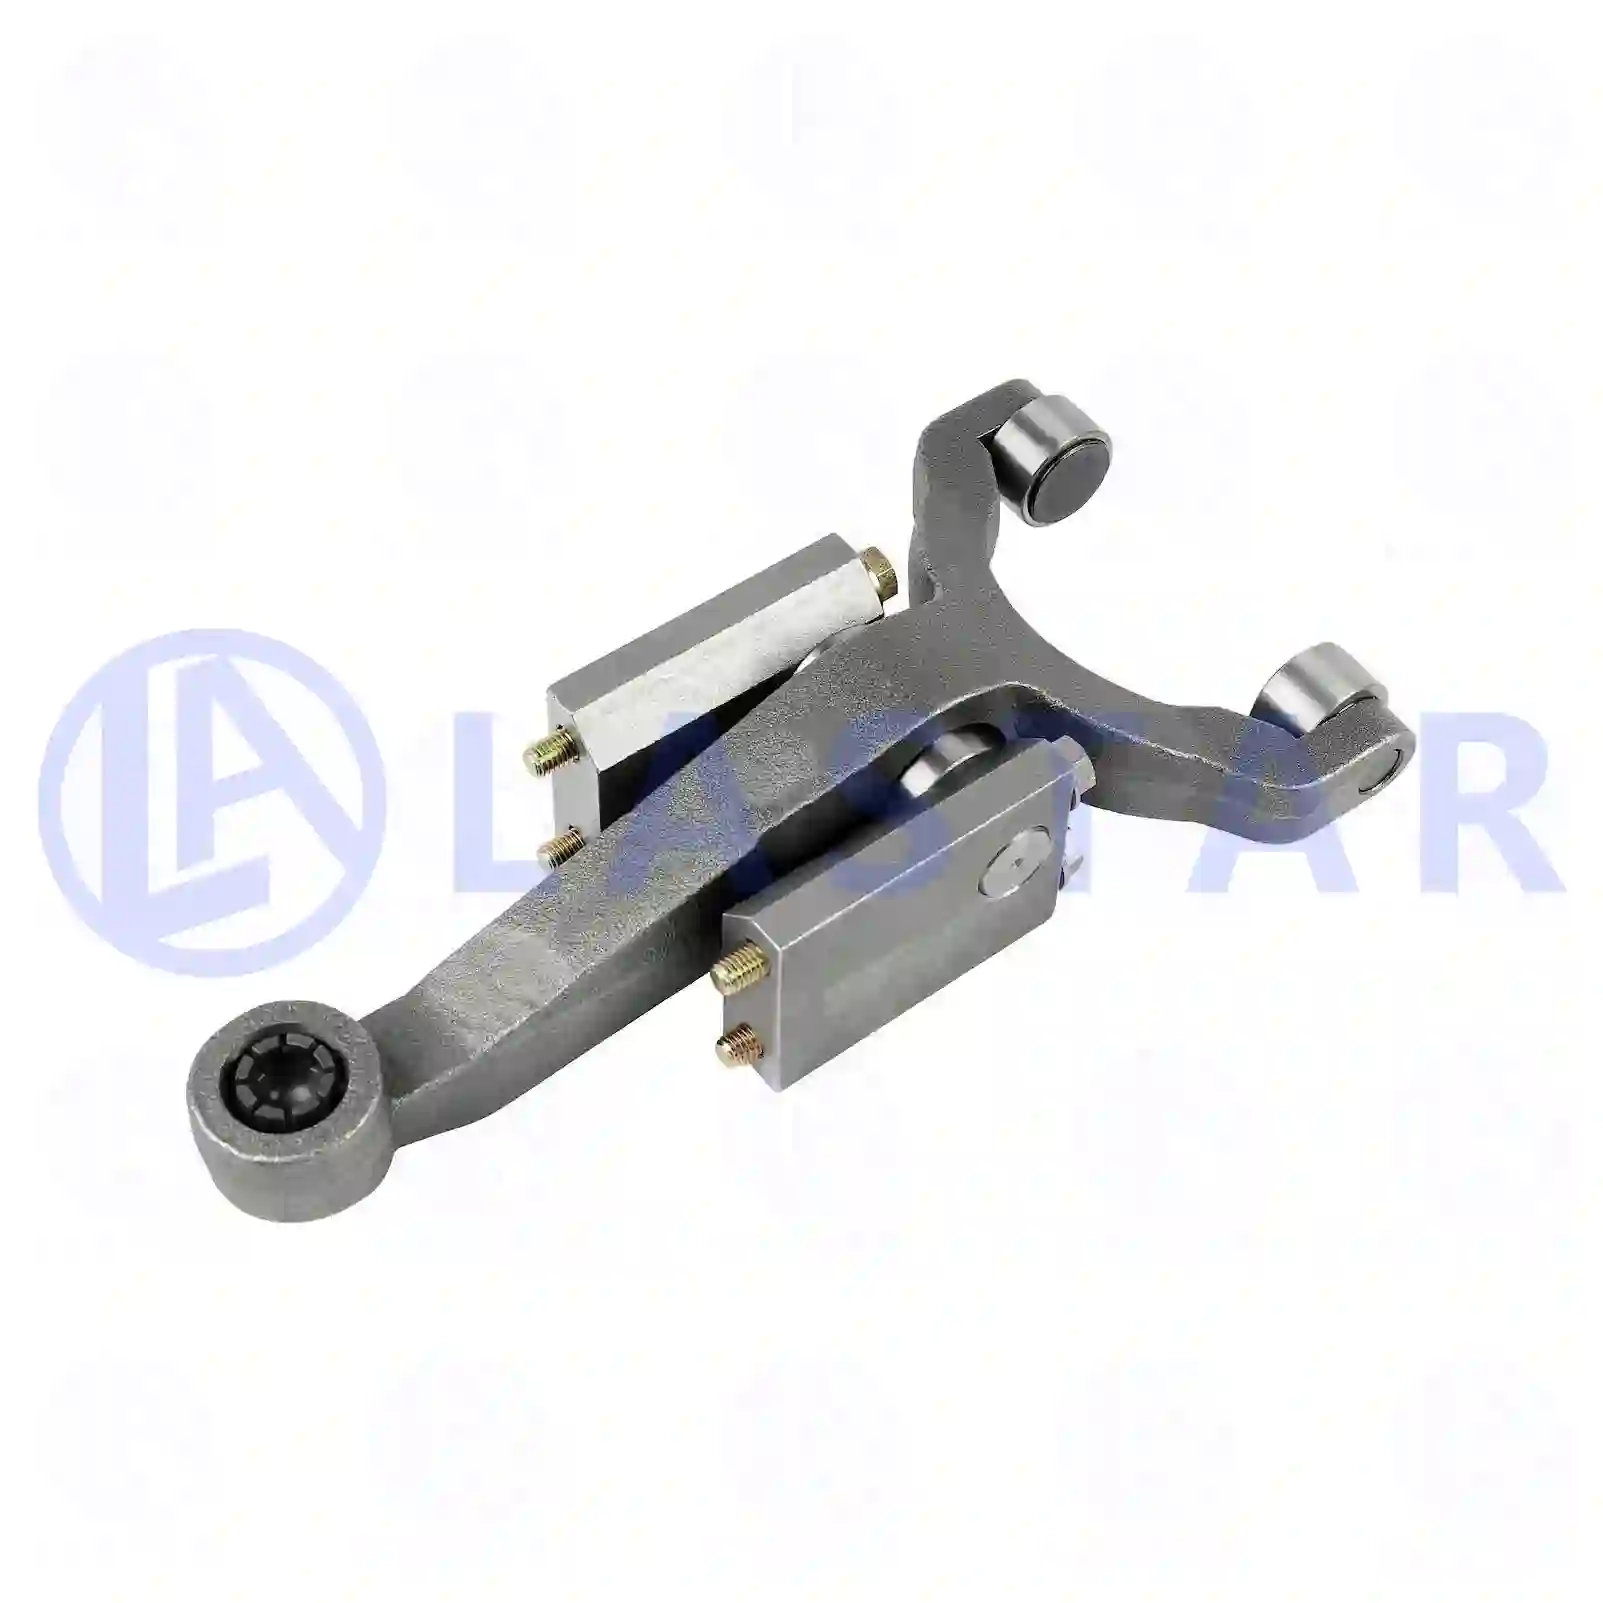 Release lever, 77722691, 1438641, ZG30367-0008 ||  77722691 Lastar Spare Part | Truck Spare Parts, Auotomotive Spare Parts Release lever, 77722691, 1438641, ZG30367-0008 ||  77722691 Lastar Spare Part | Truck Spare Parts, Auotomotive Spare Parts